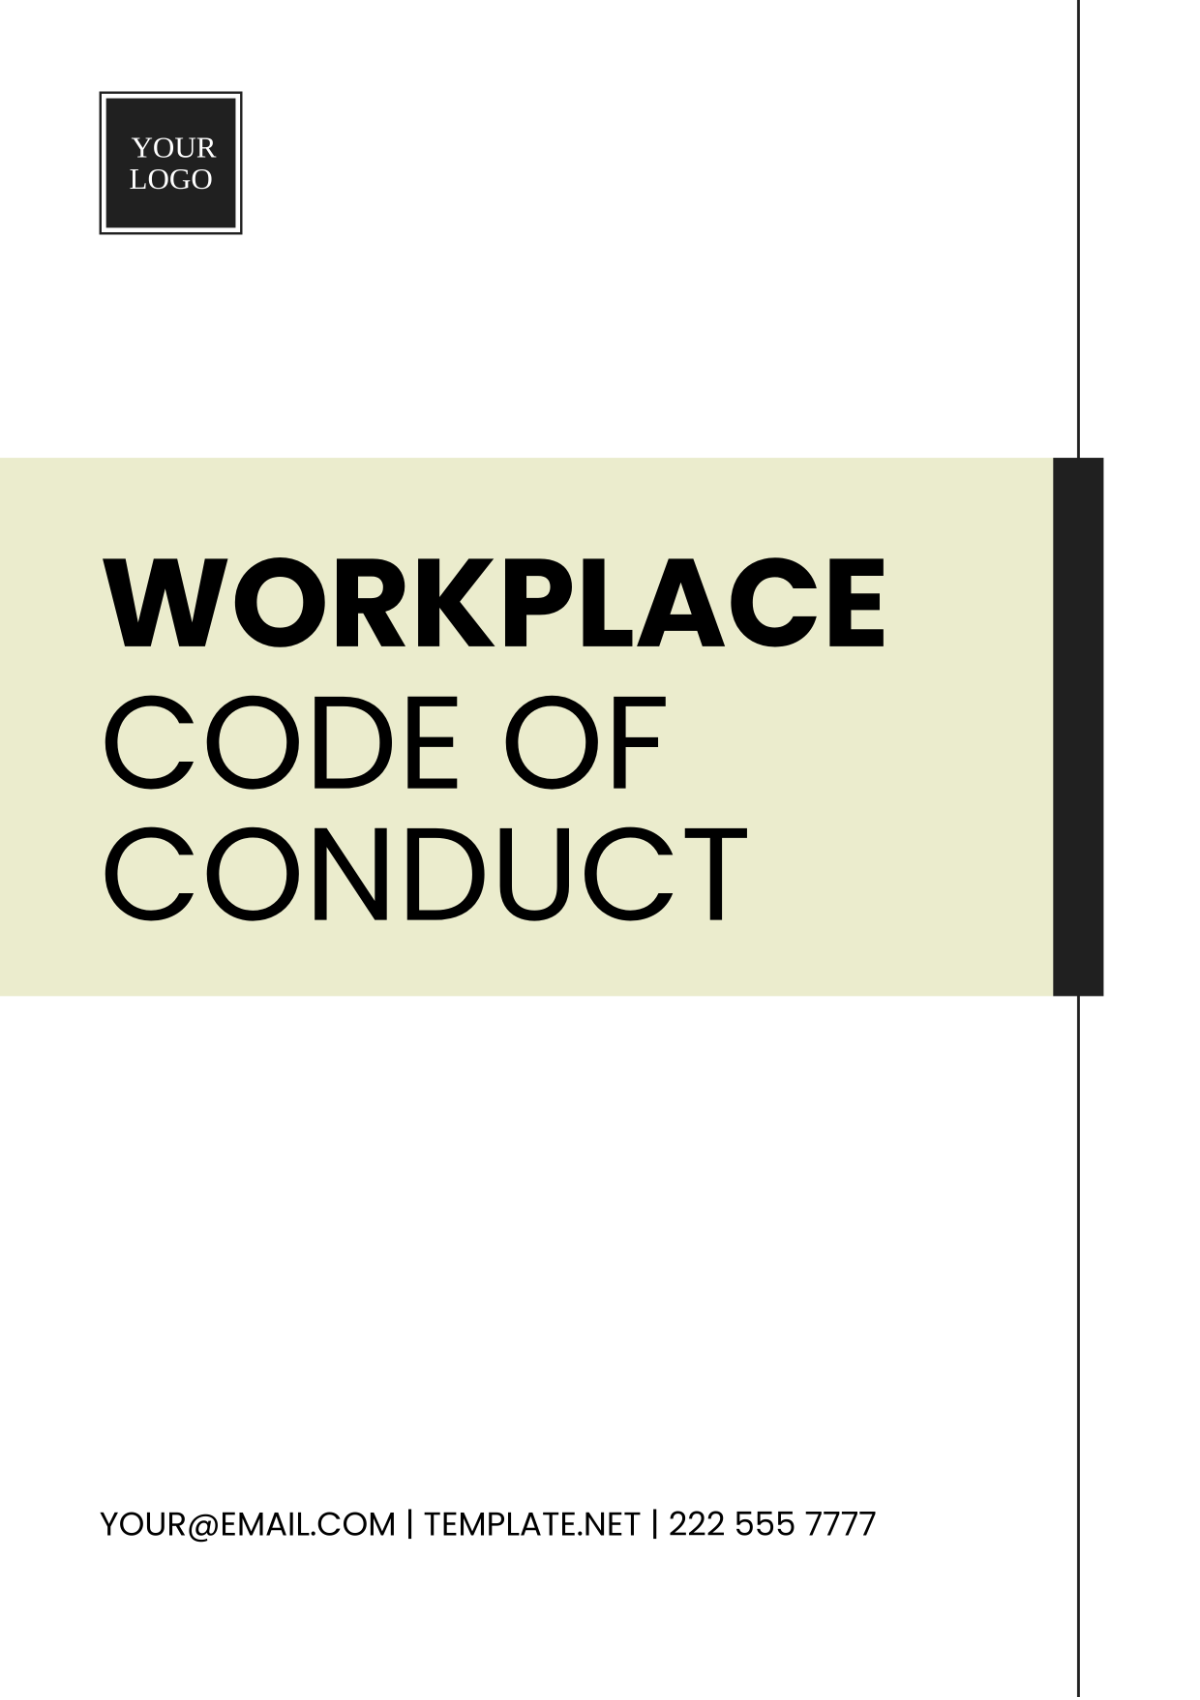 Workplace Code of Conduct Template